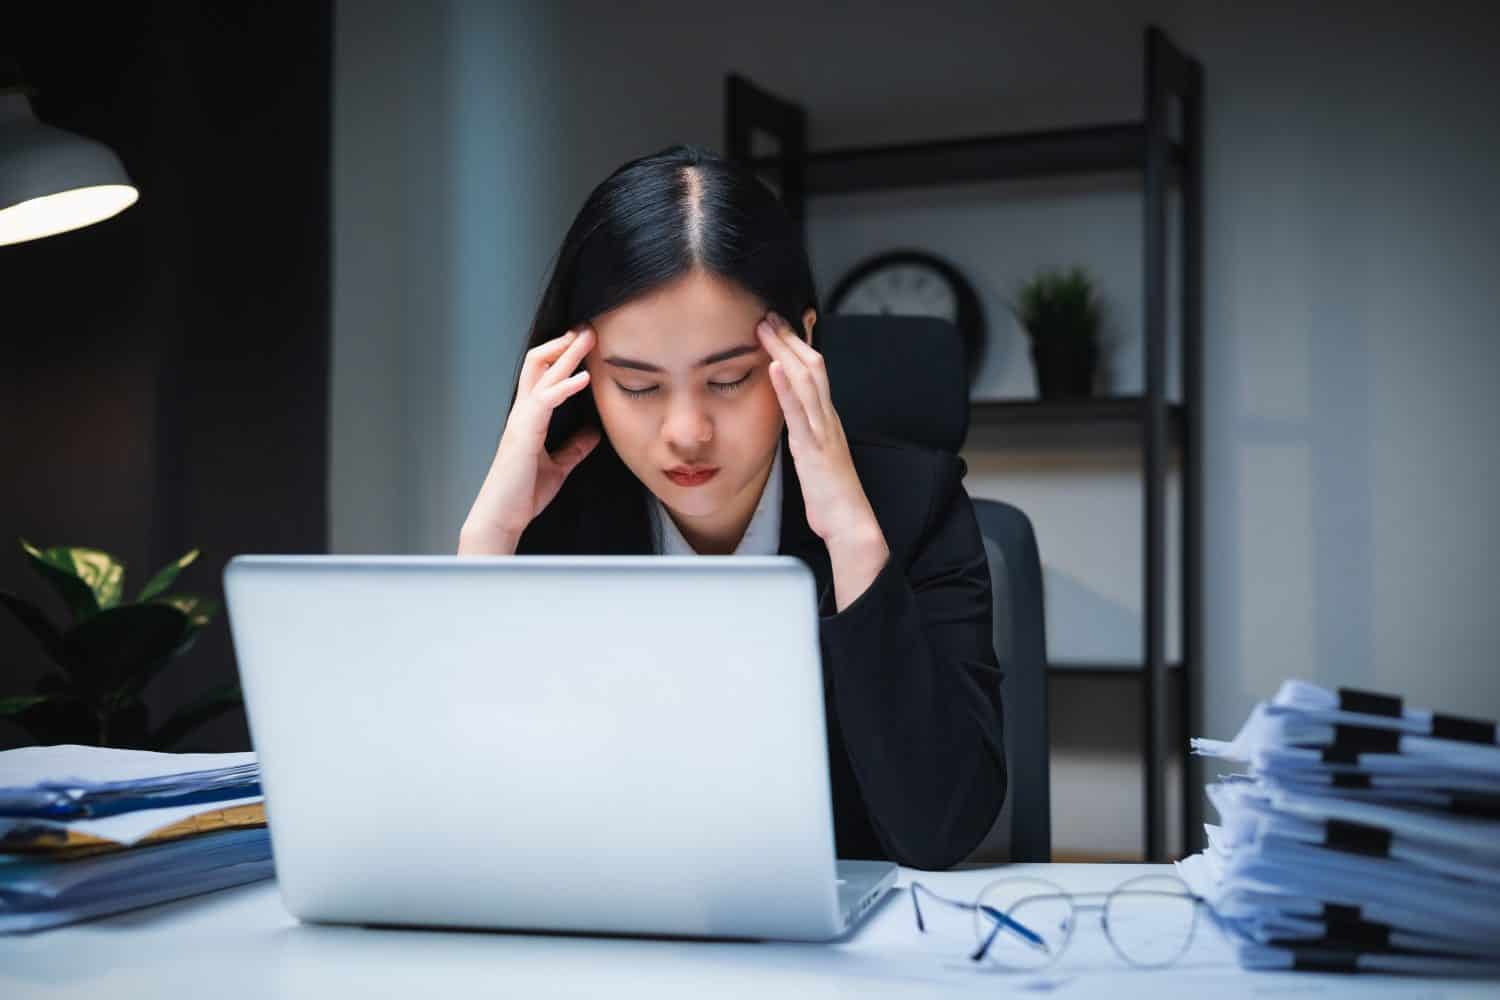 Stressed business woman working late at night in the office hands on head feeling headache. Tired woman looking at laptop working hard sitting in the dark room office. Overtime concept